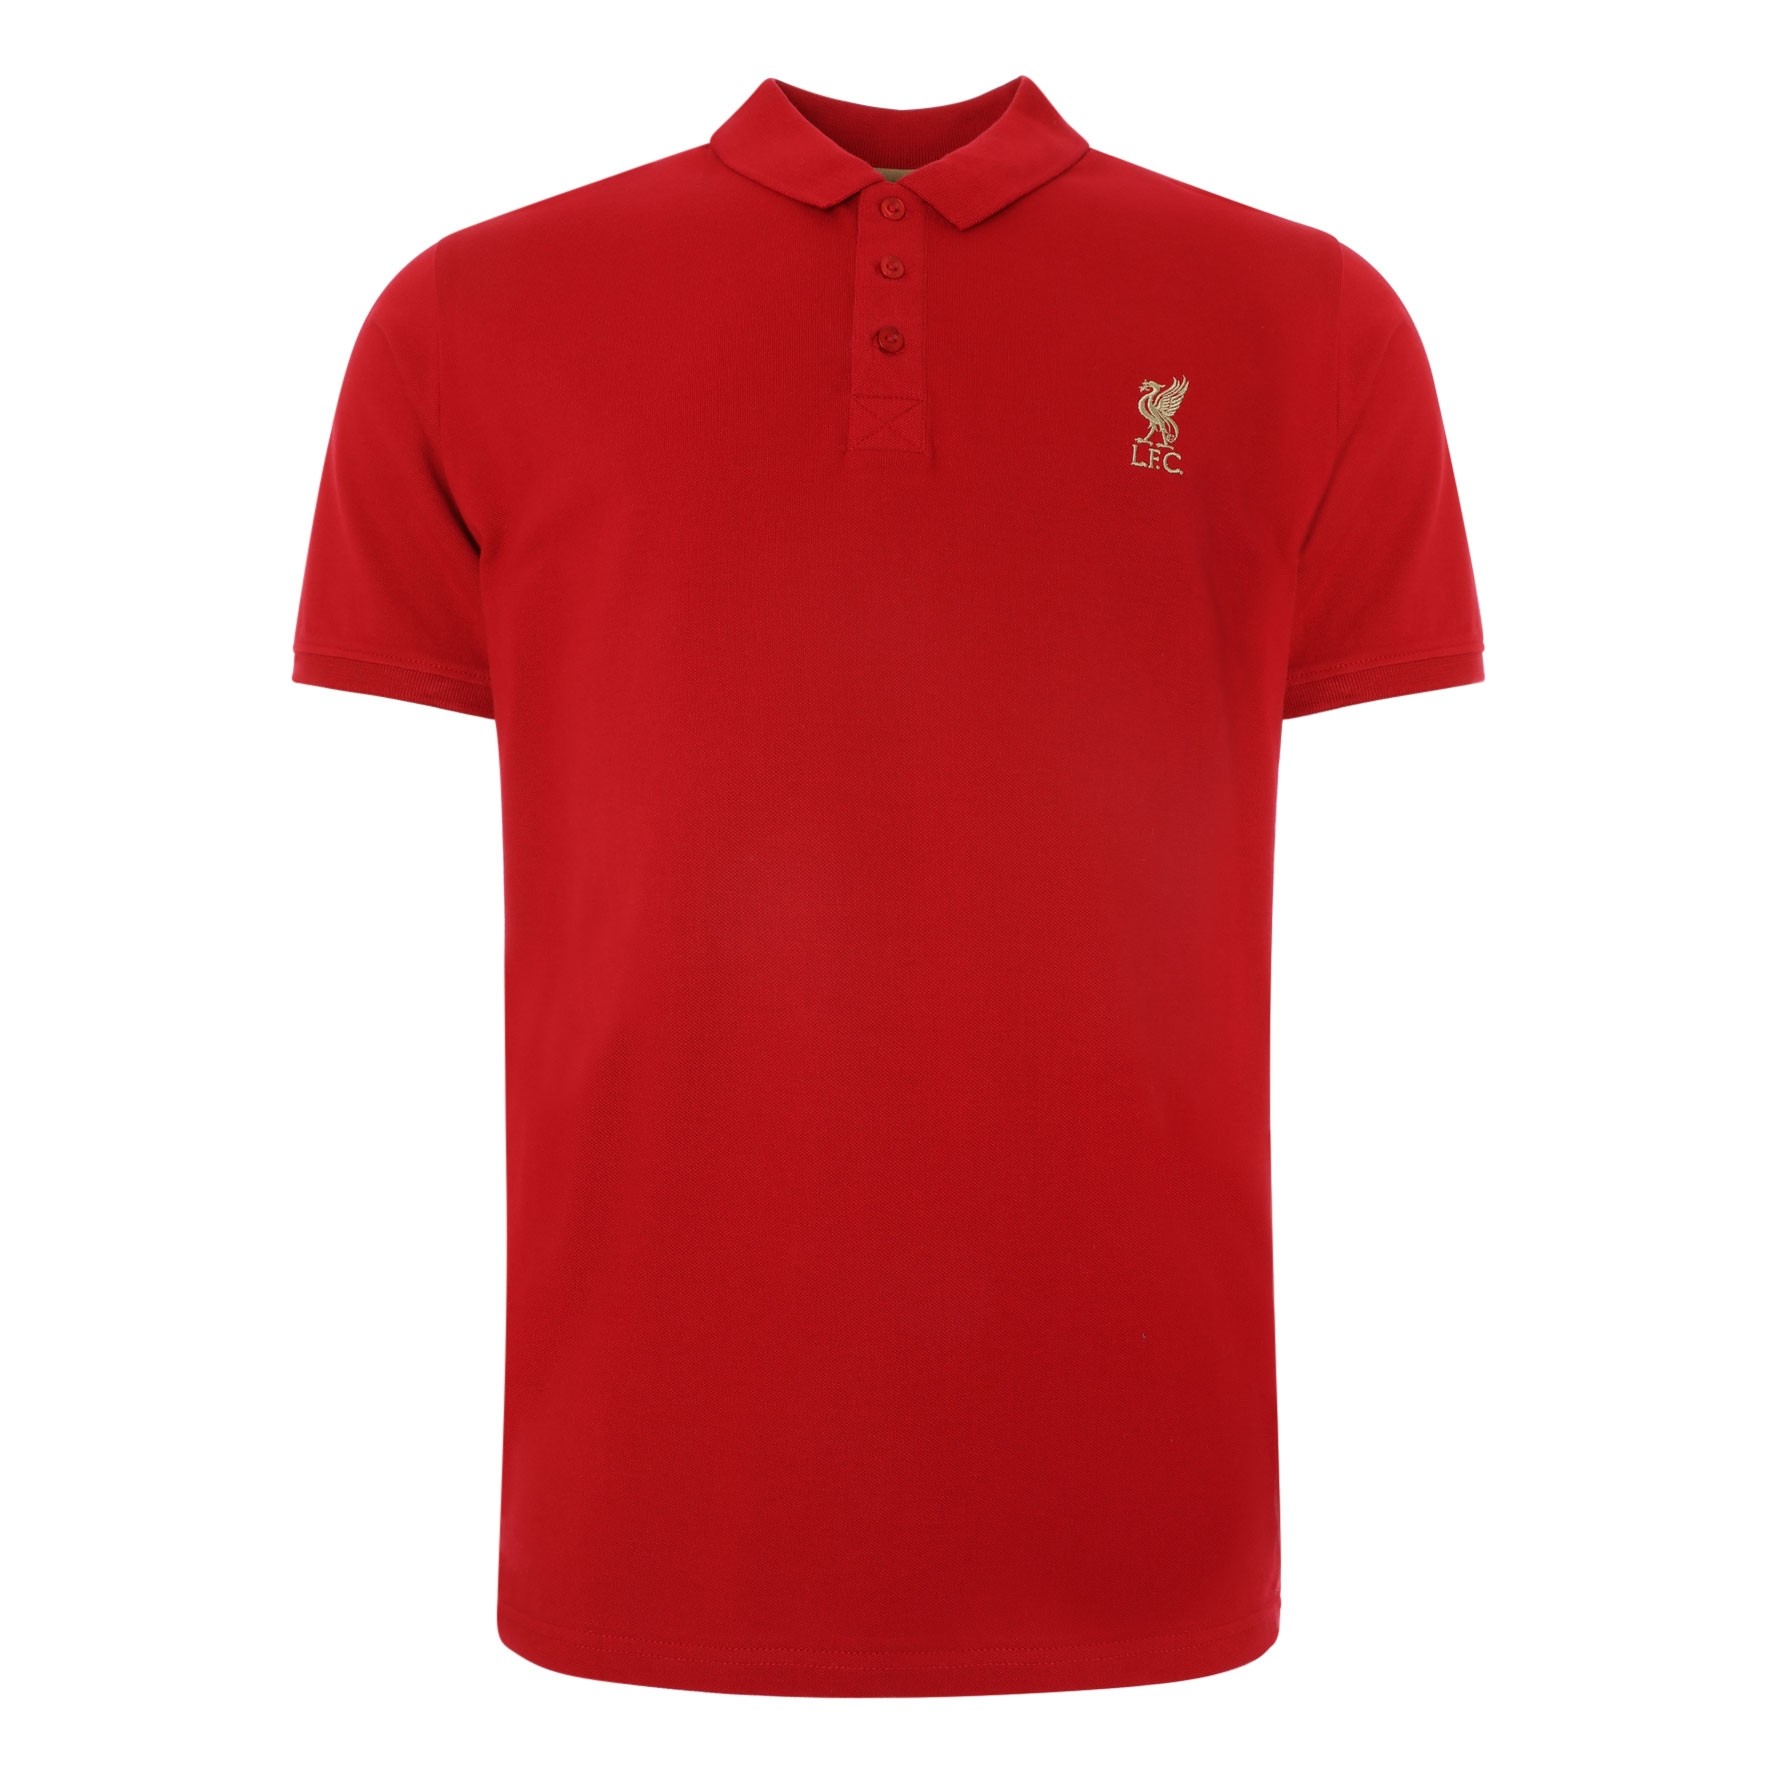 LFC Mens Conninsby Vintage Red Polo